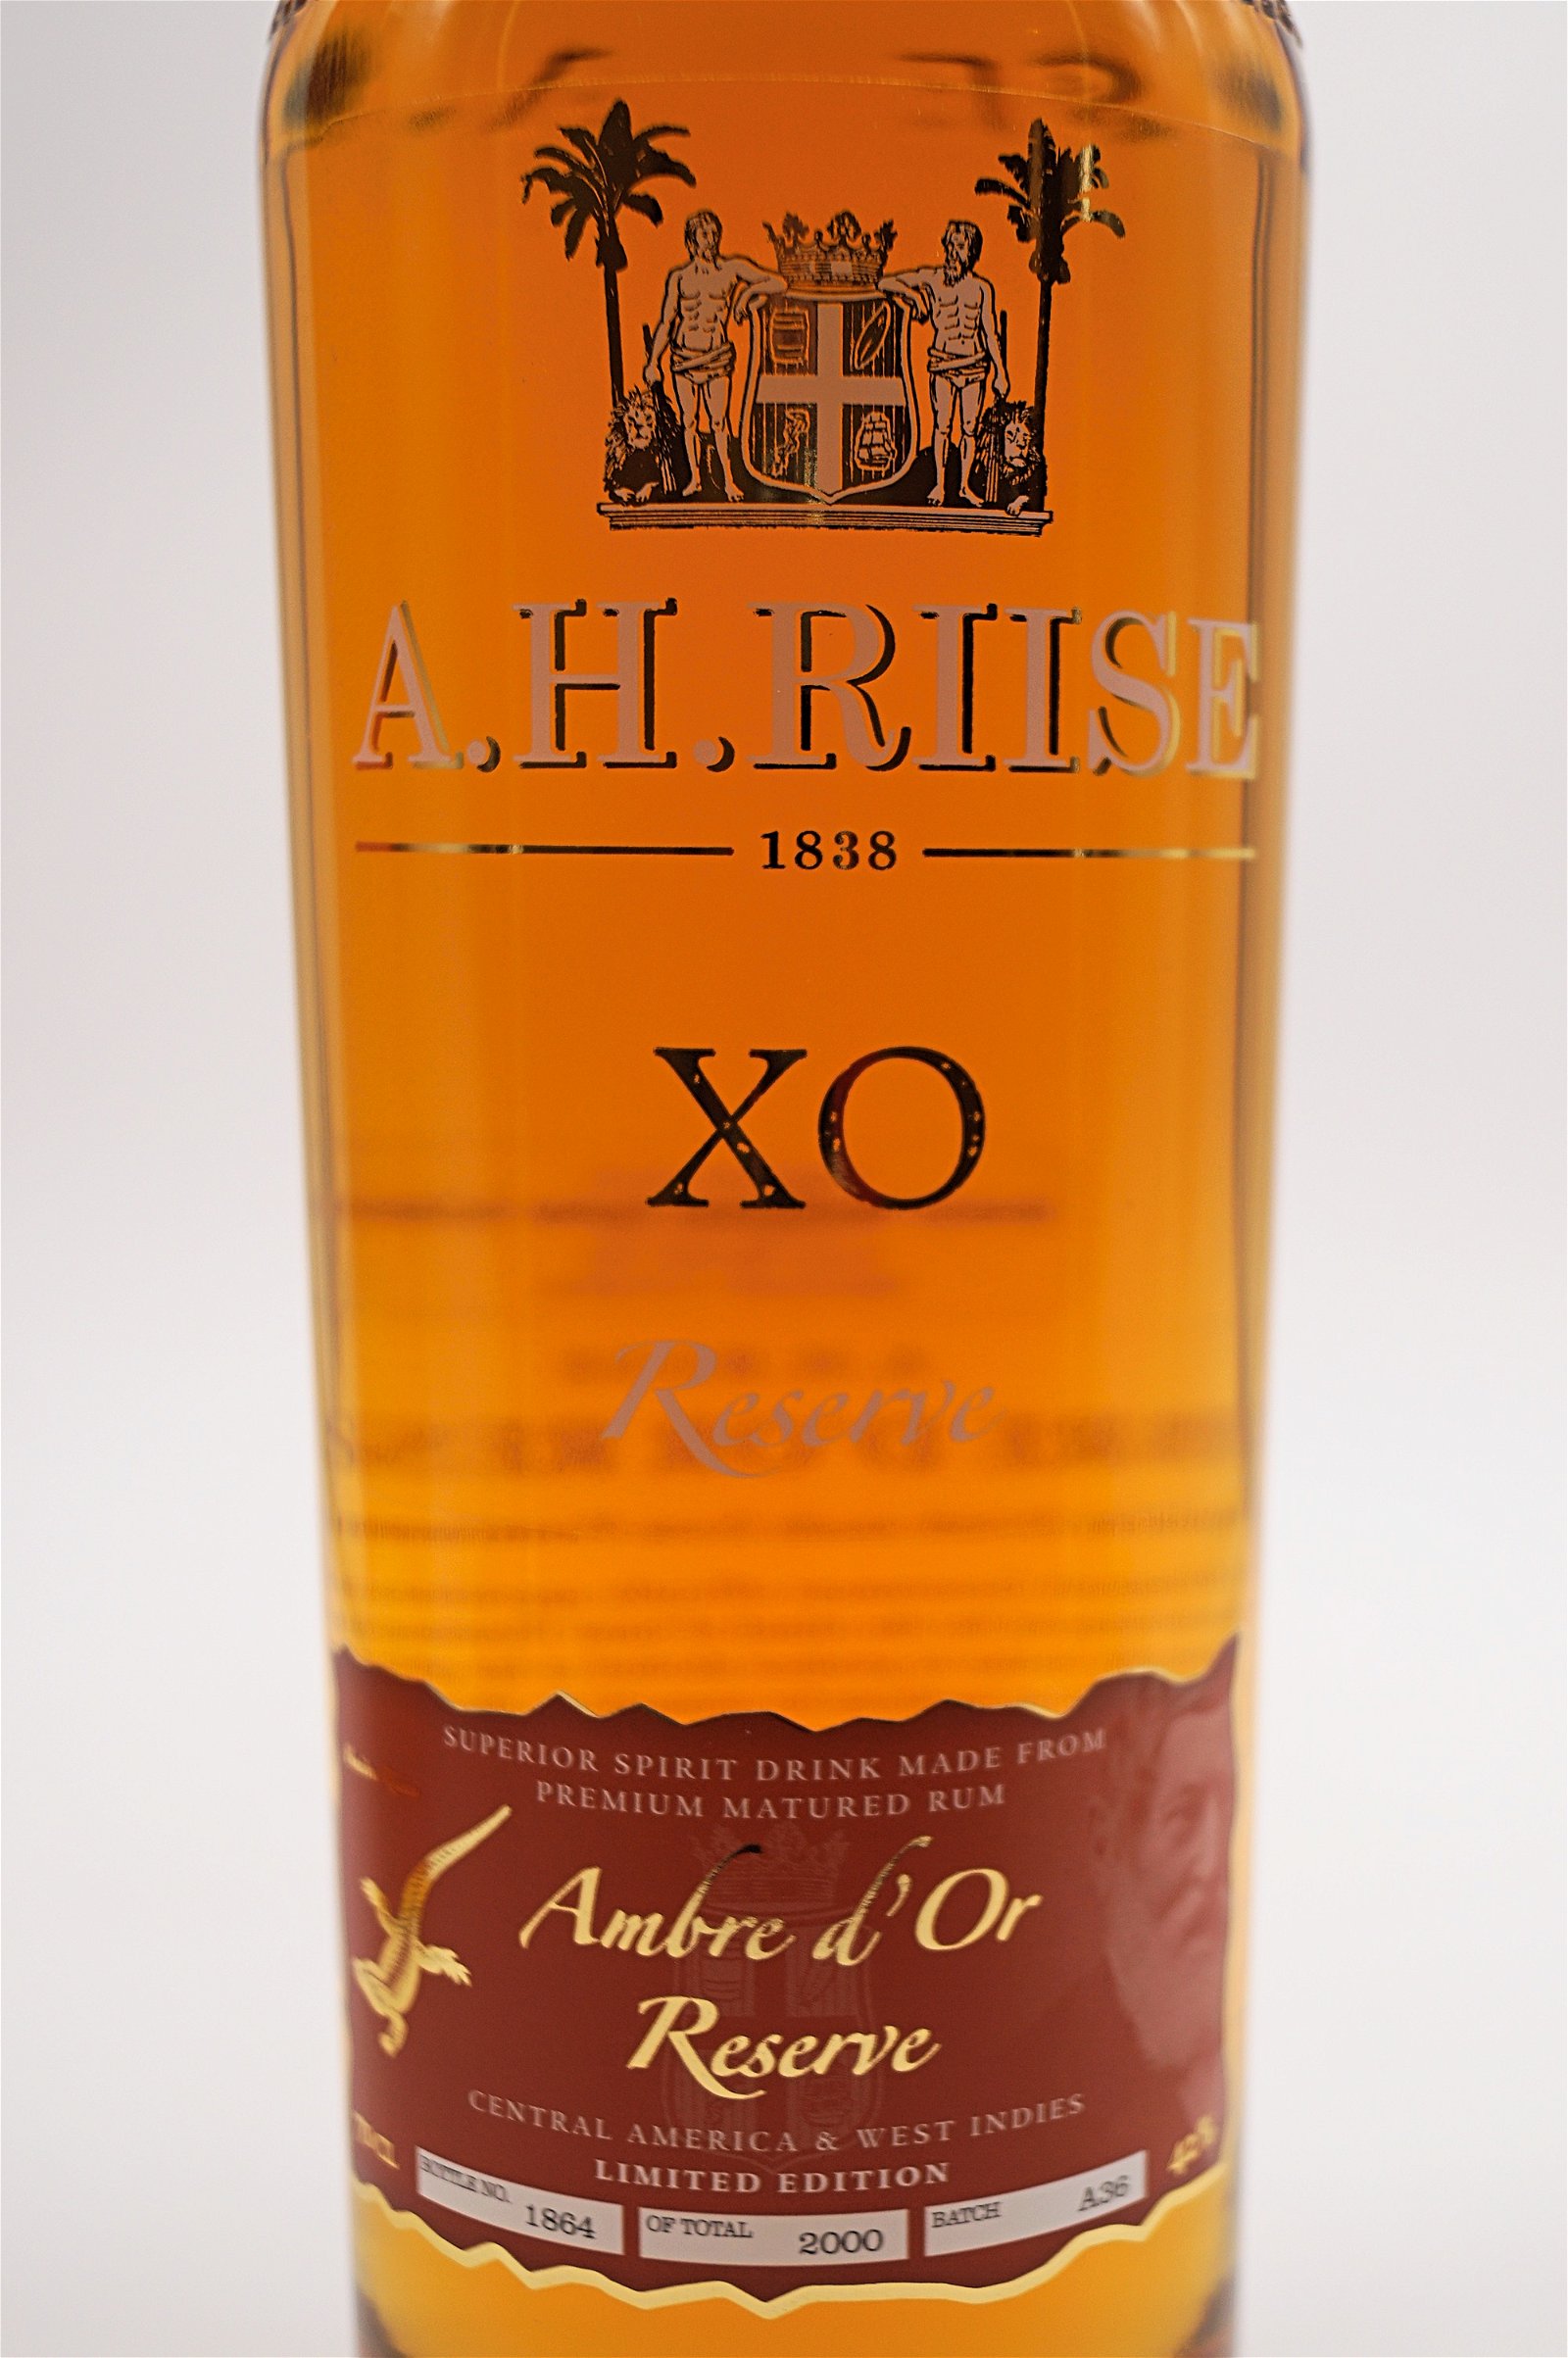 A.H.Riise XO Ambre d Or Reserve